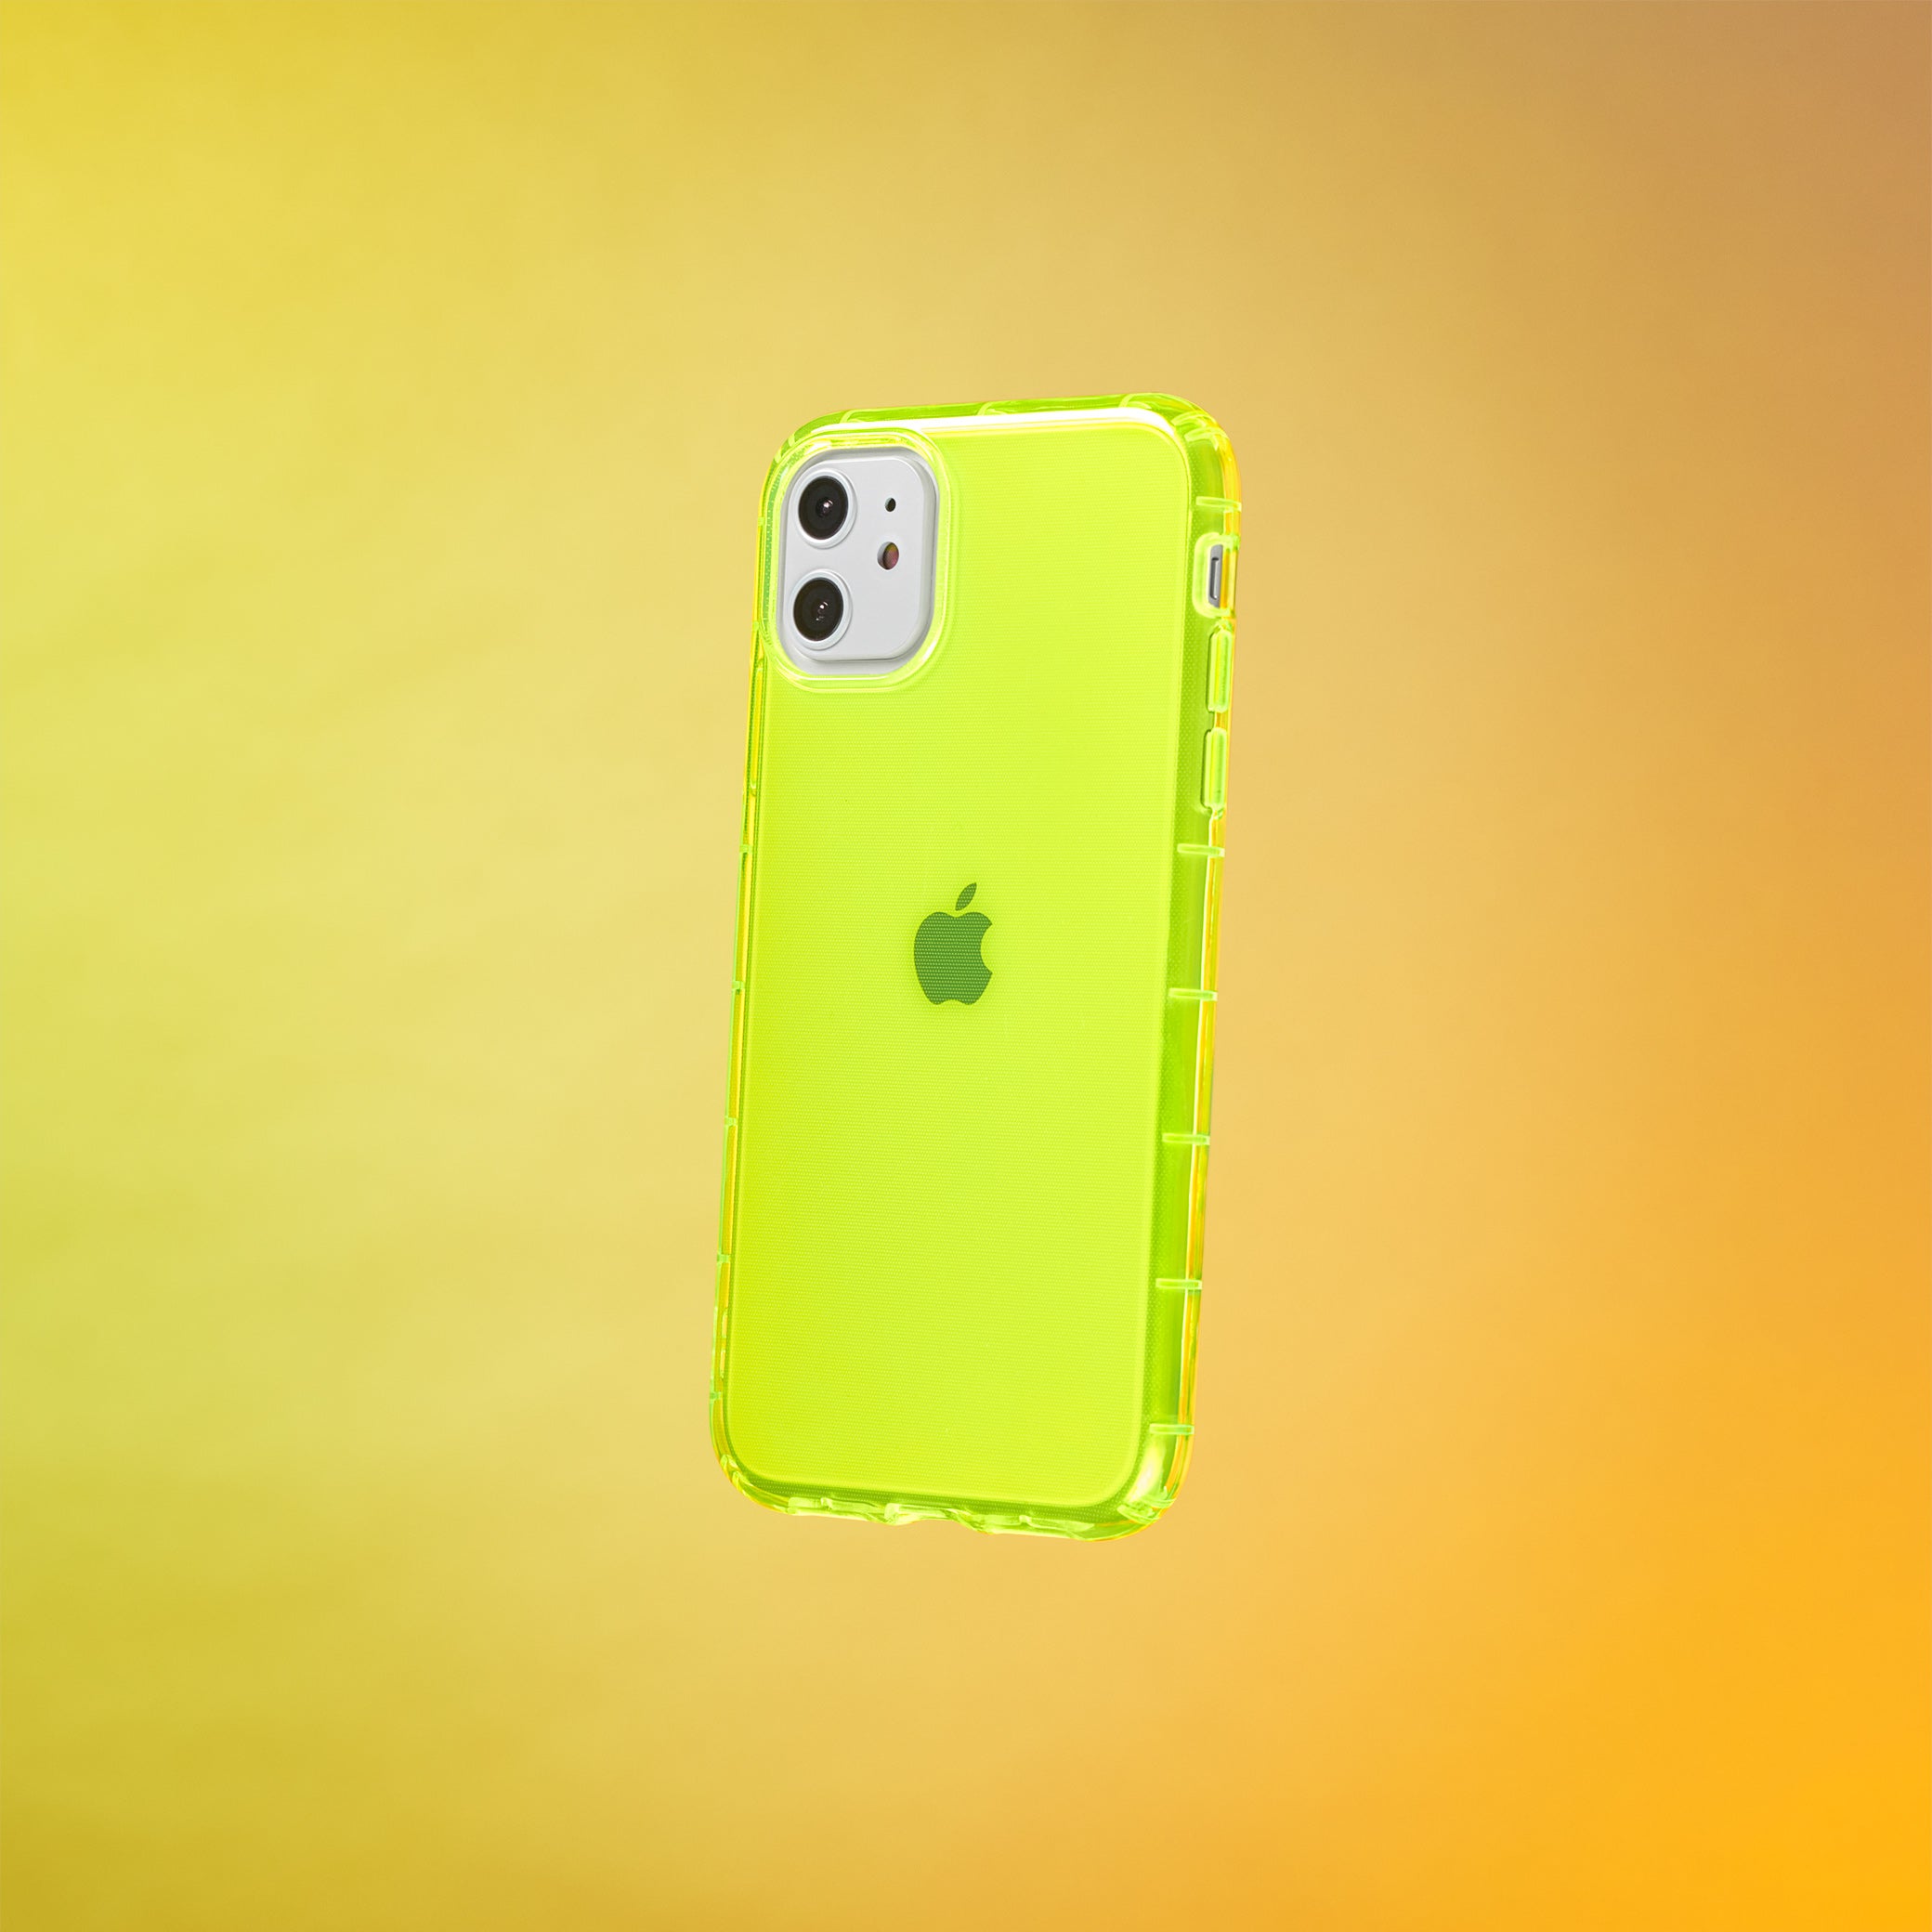 Highlighter Case for iPhone 11 - Conspicuous Neon Yellow